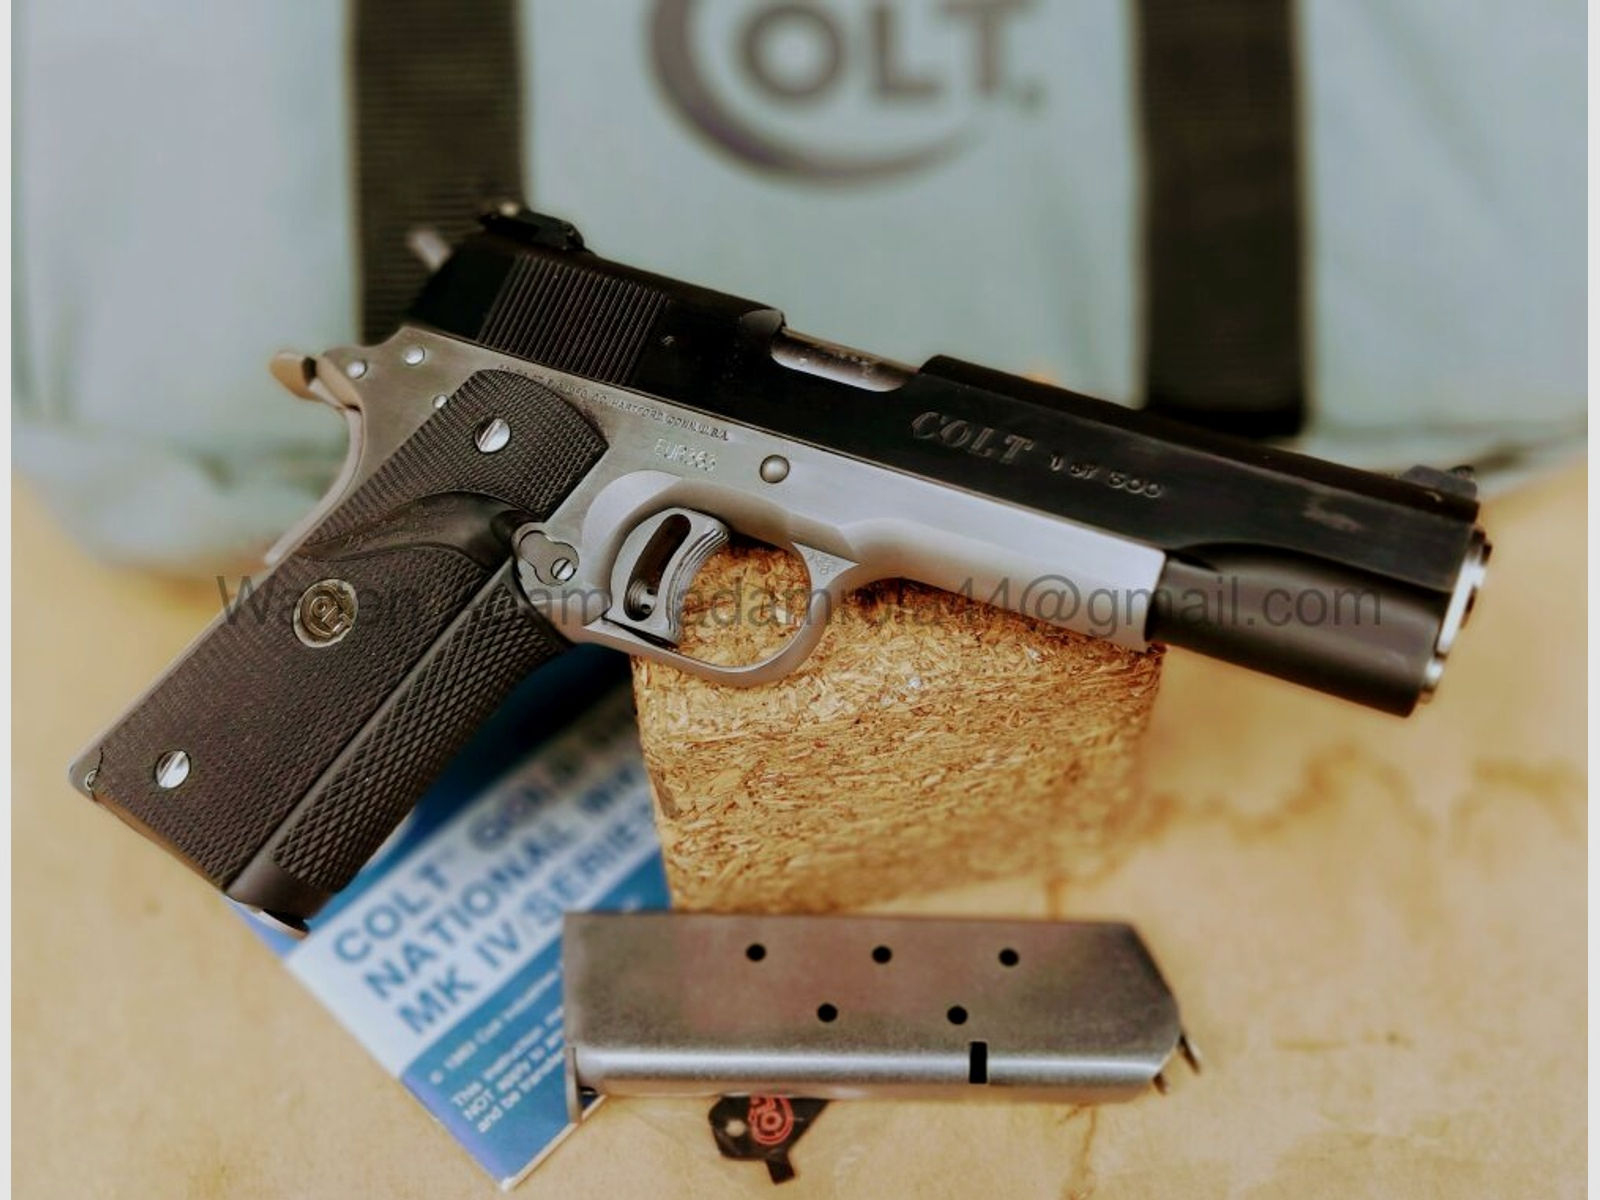 Colt	 1911 Modell Euro Match 1 of 500